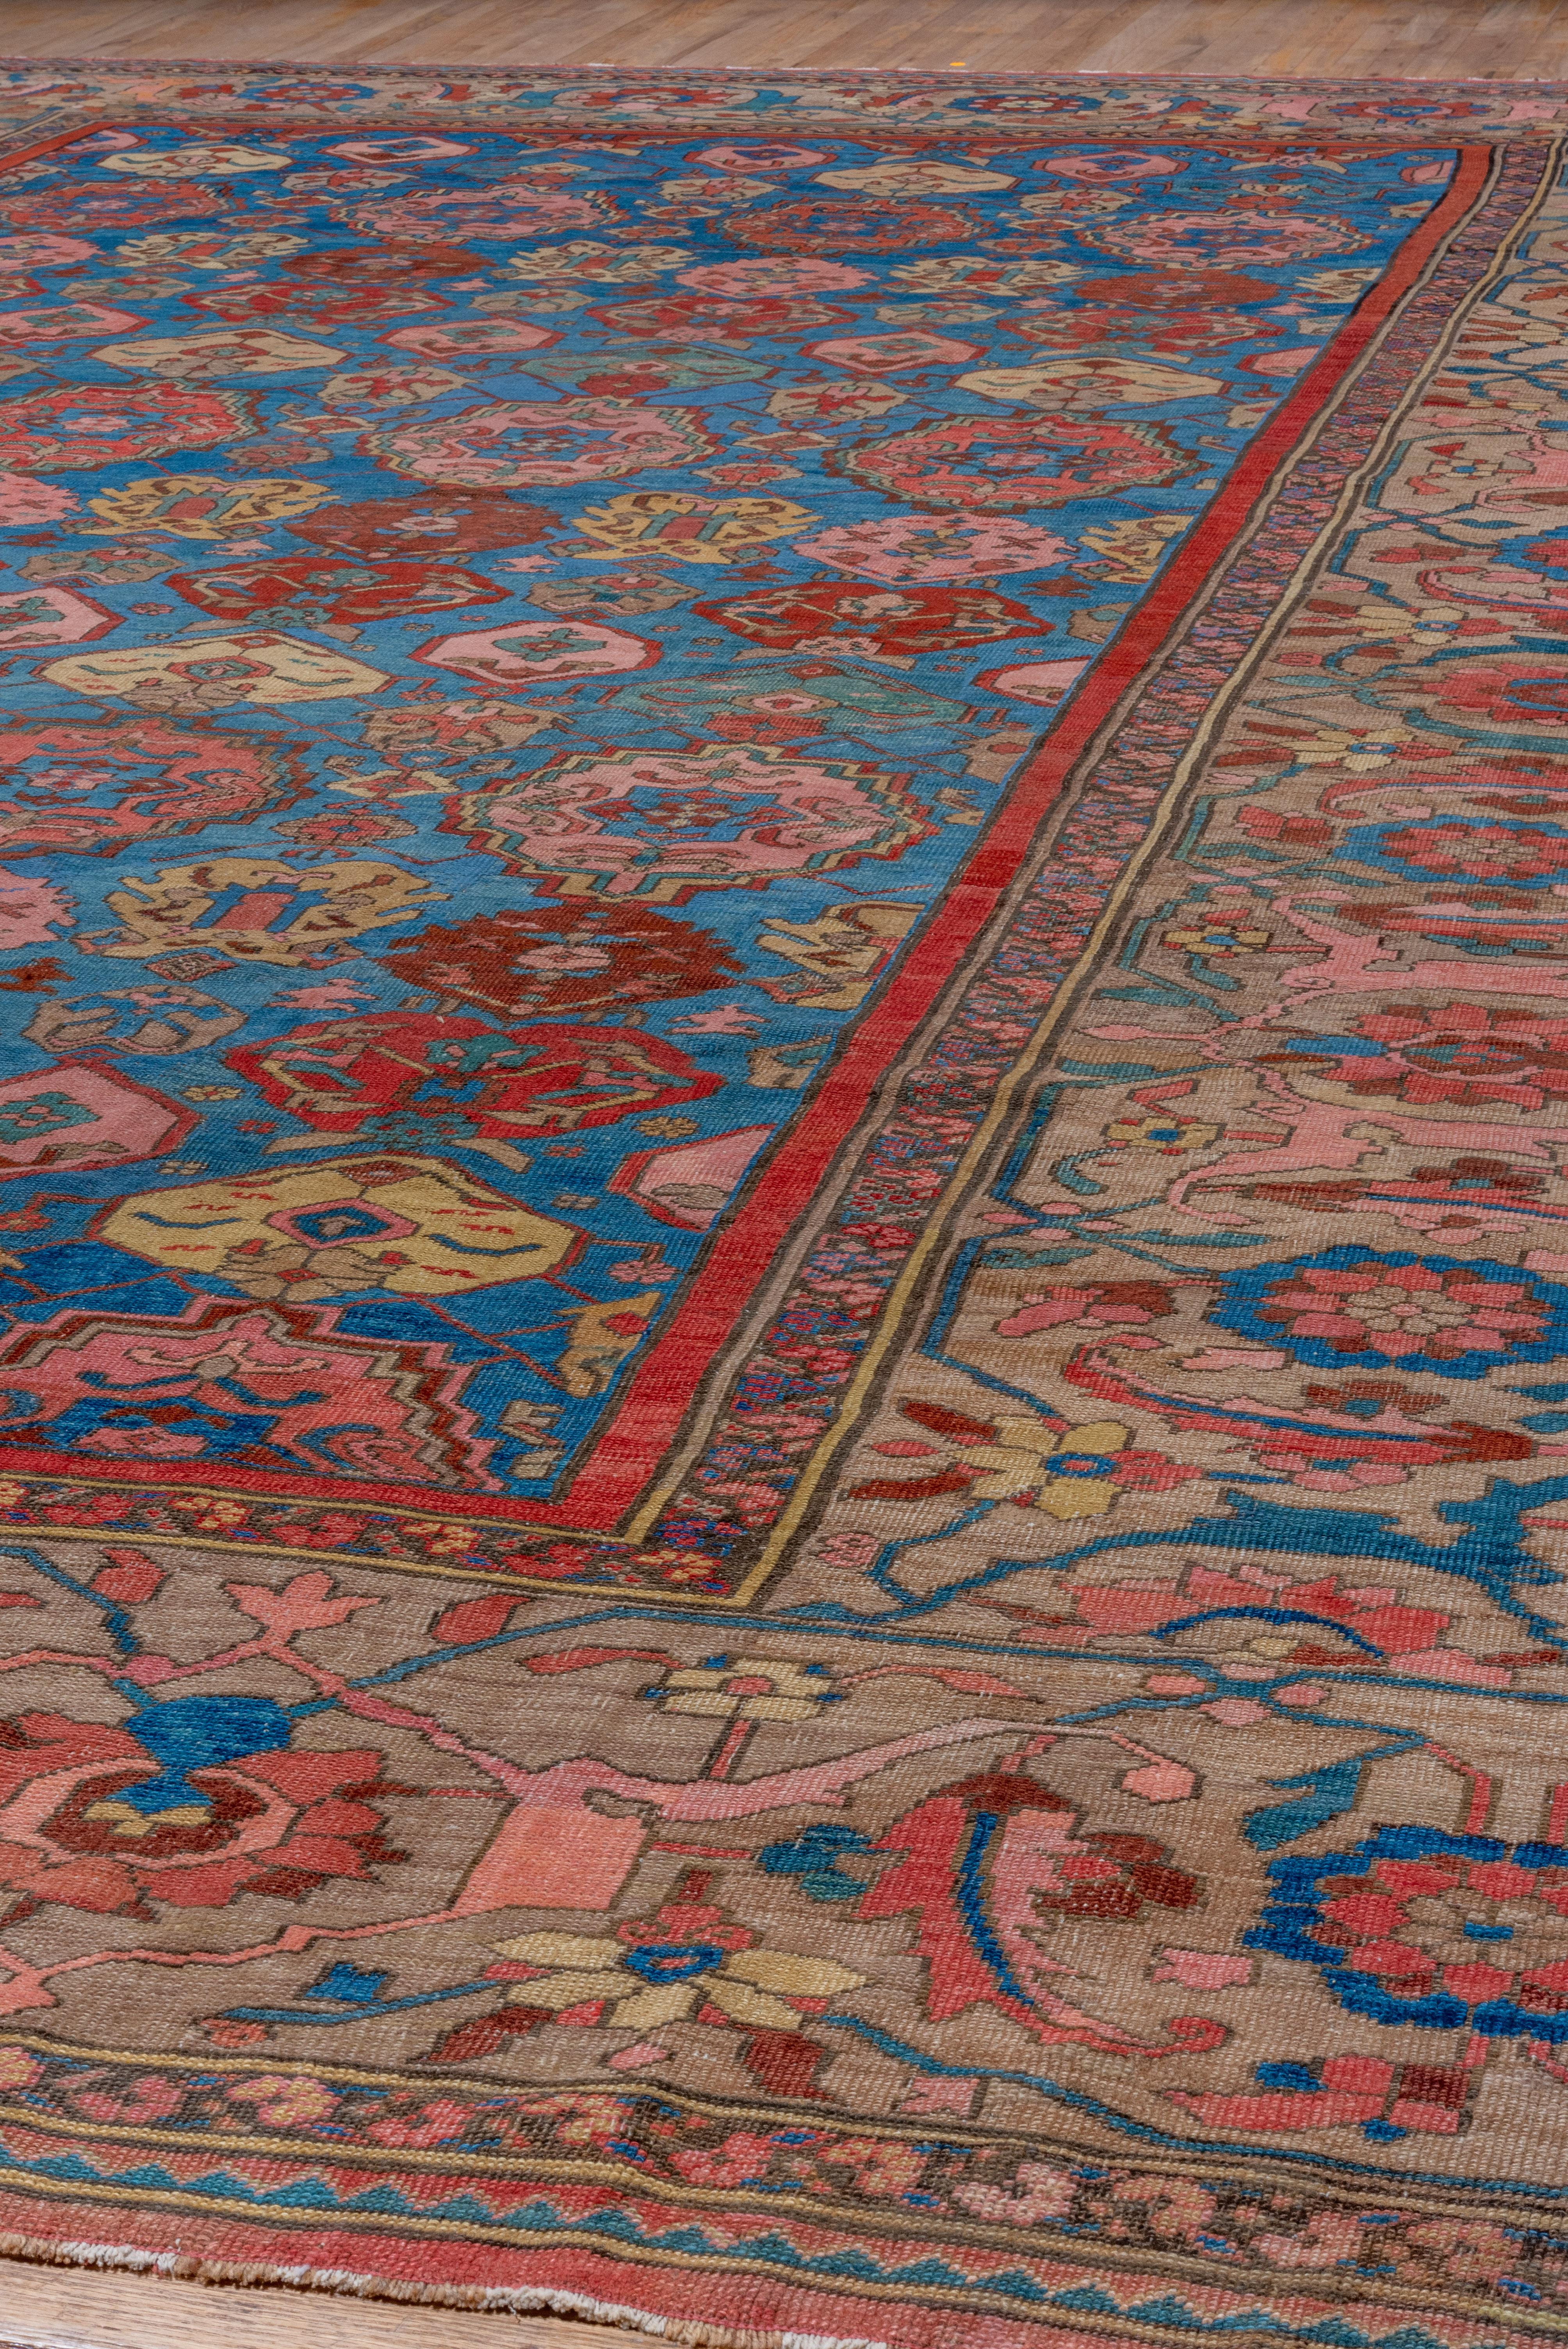 Hand-Knotted Outsanding Colorful Antique Persian Bakhshayesh Carpet, Late 19th Century For Sale